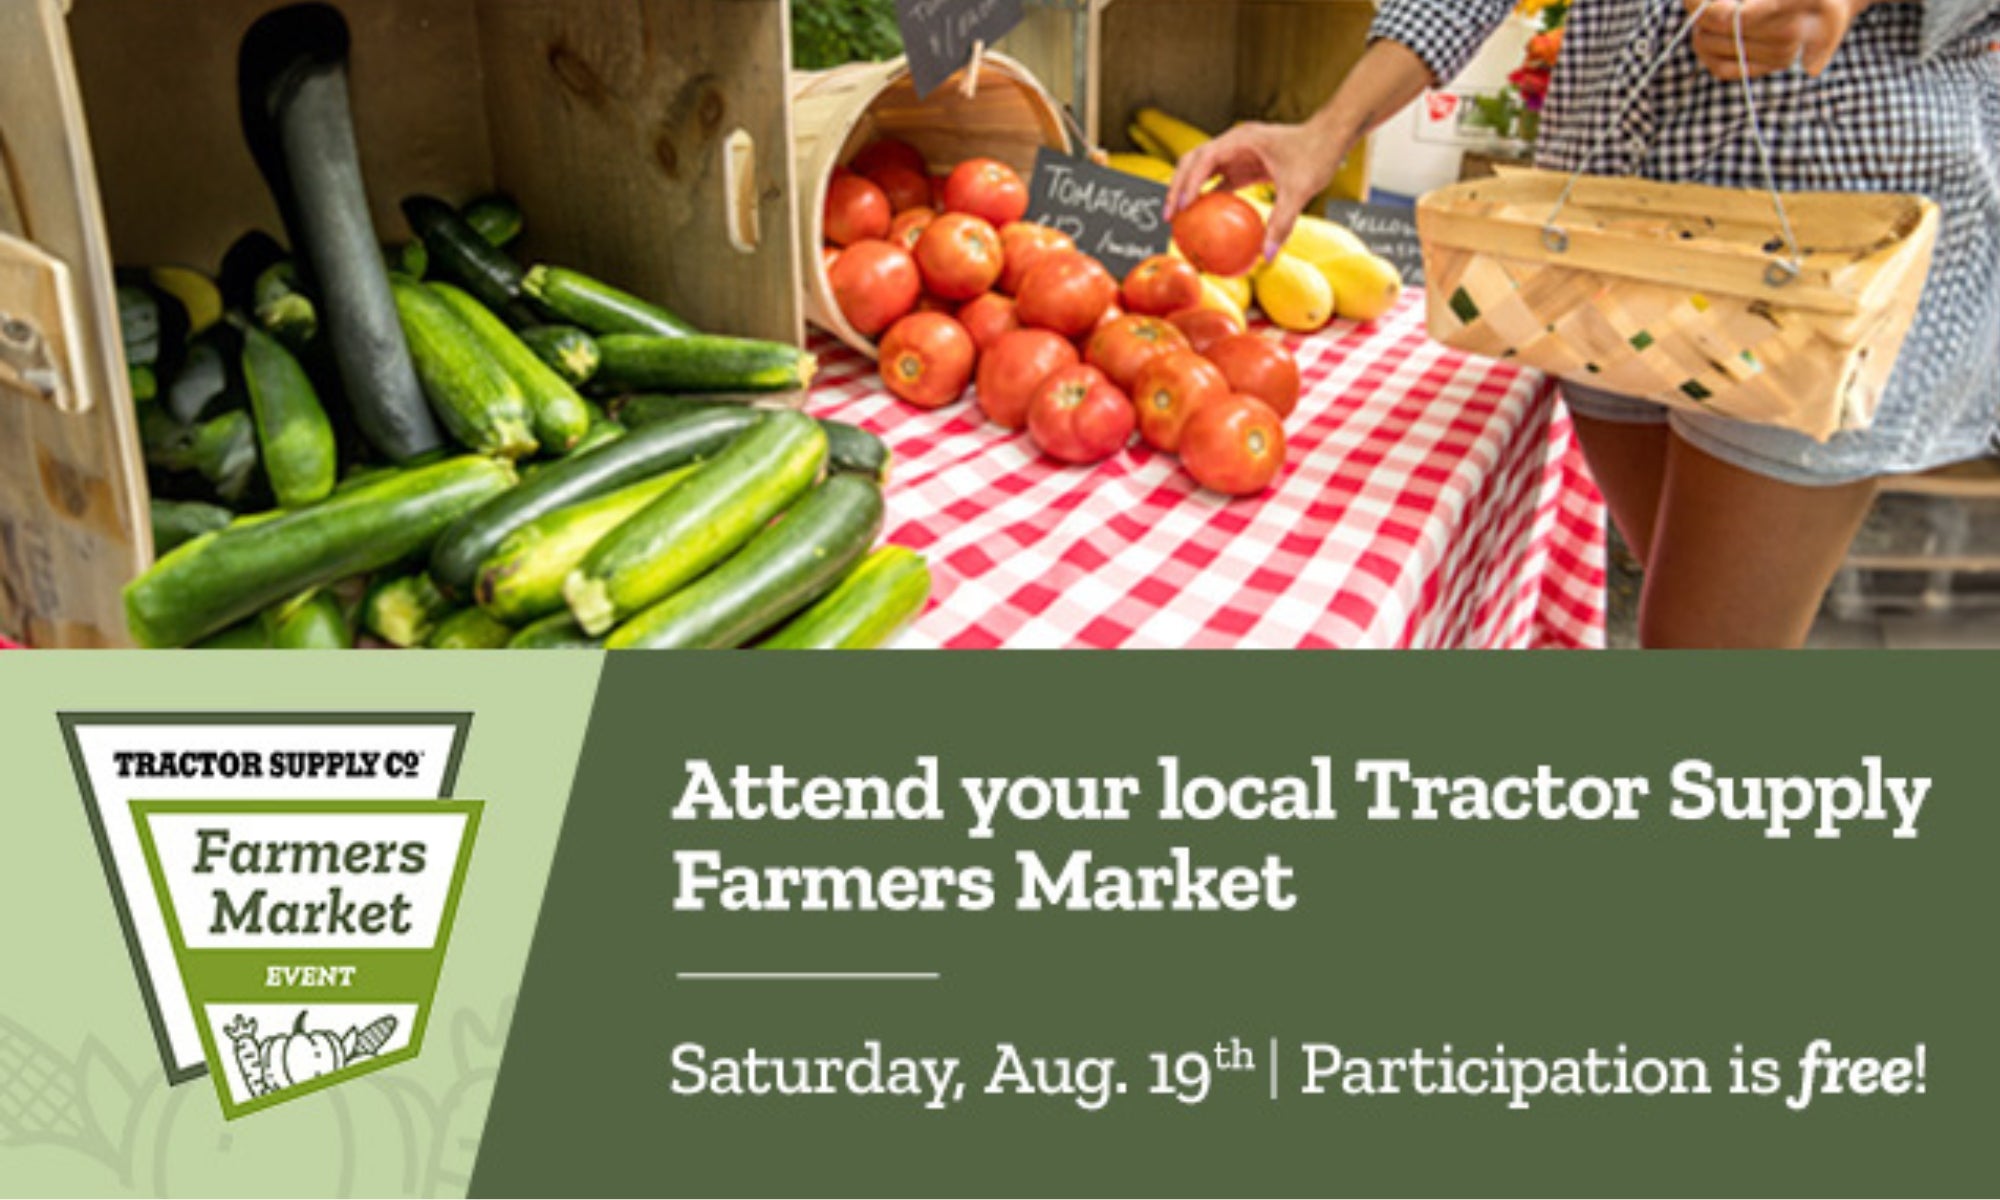 Tractor Supply to host nationwide Farmers Market on Aug. 19 AGDAILY